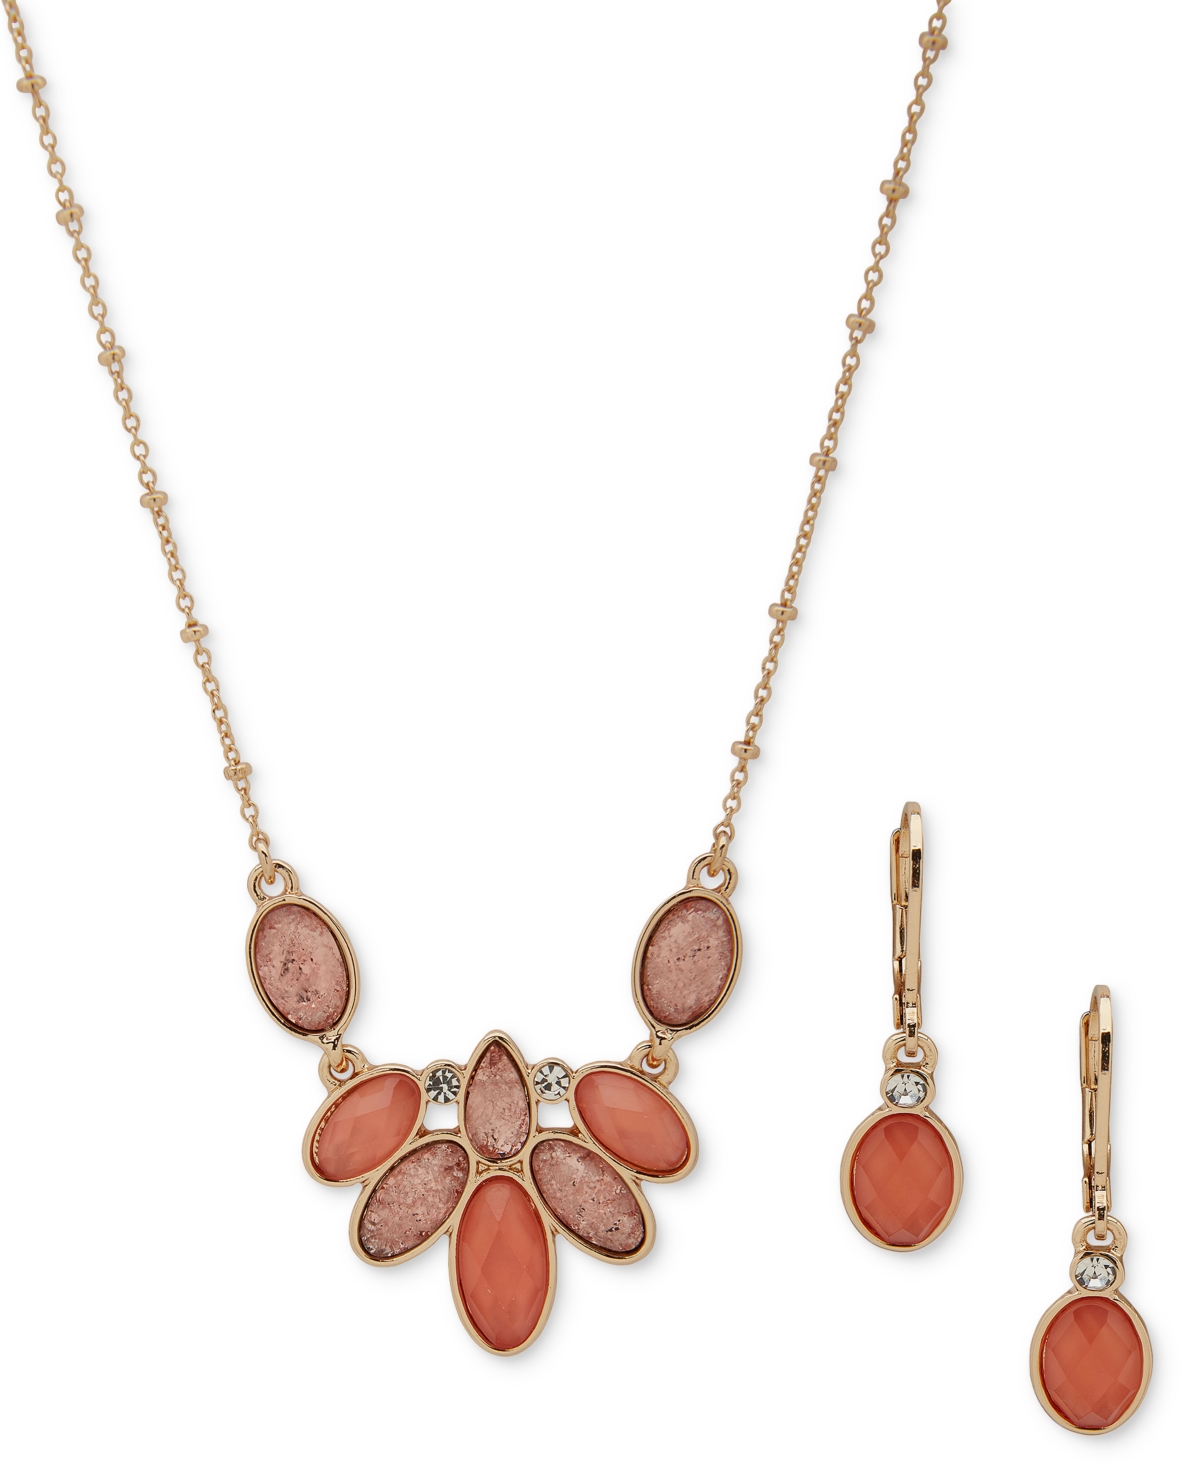 Gold-Tone Mixed Stone Statement Necklace & Drop Earrings Set - Multi